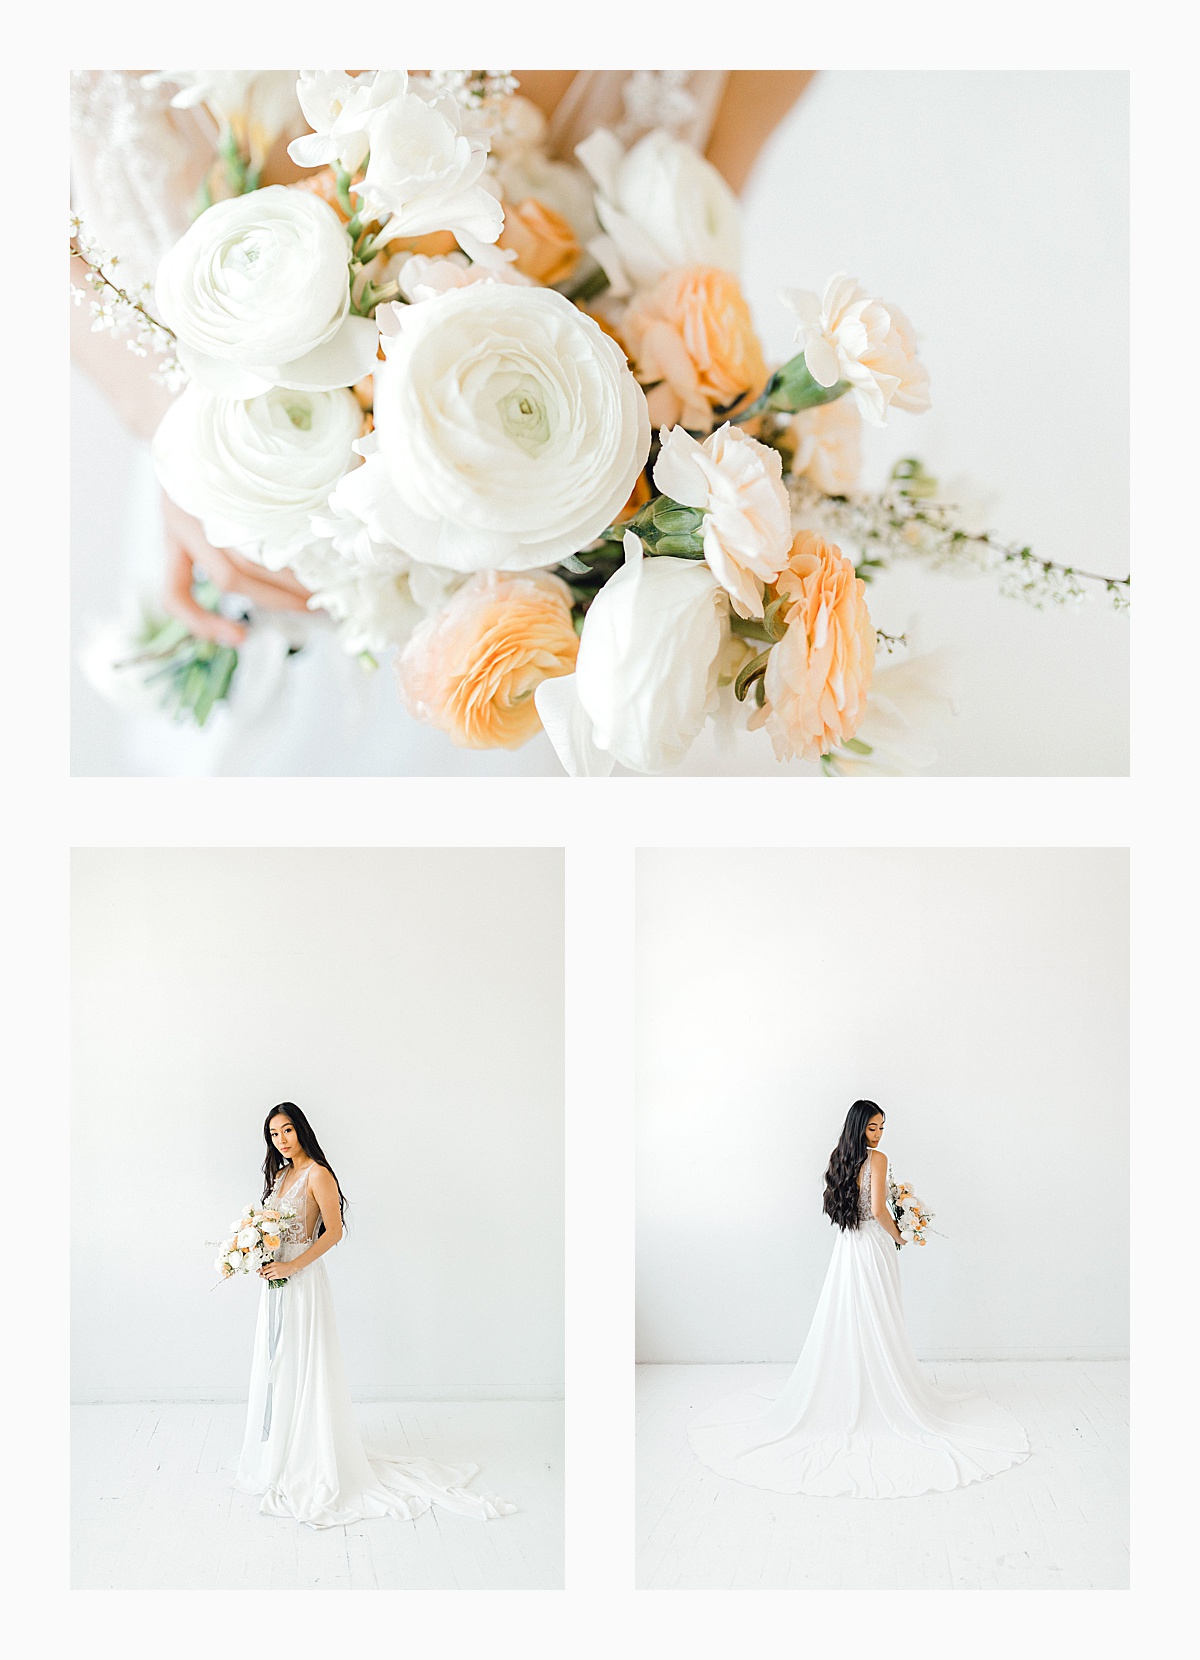 The Bemis Building in downtown Seattle is one of my favorite places to use for photo shoots!  This styled bridal shoot with touches of peach and white was dreamy.  #emmarosecompany #kindredpresets #seattlebride_0012.jpg